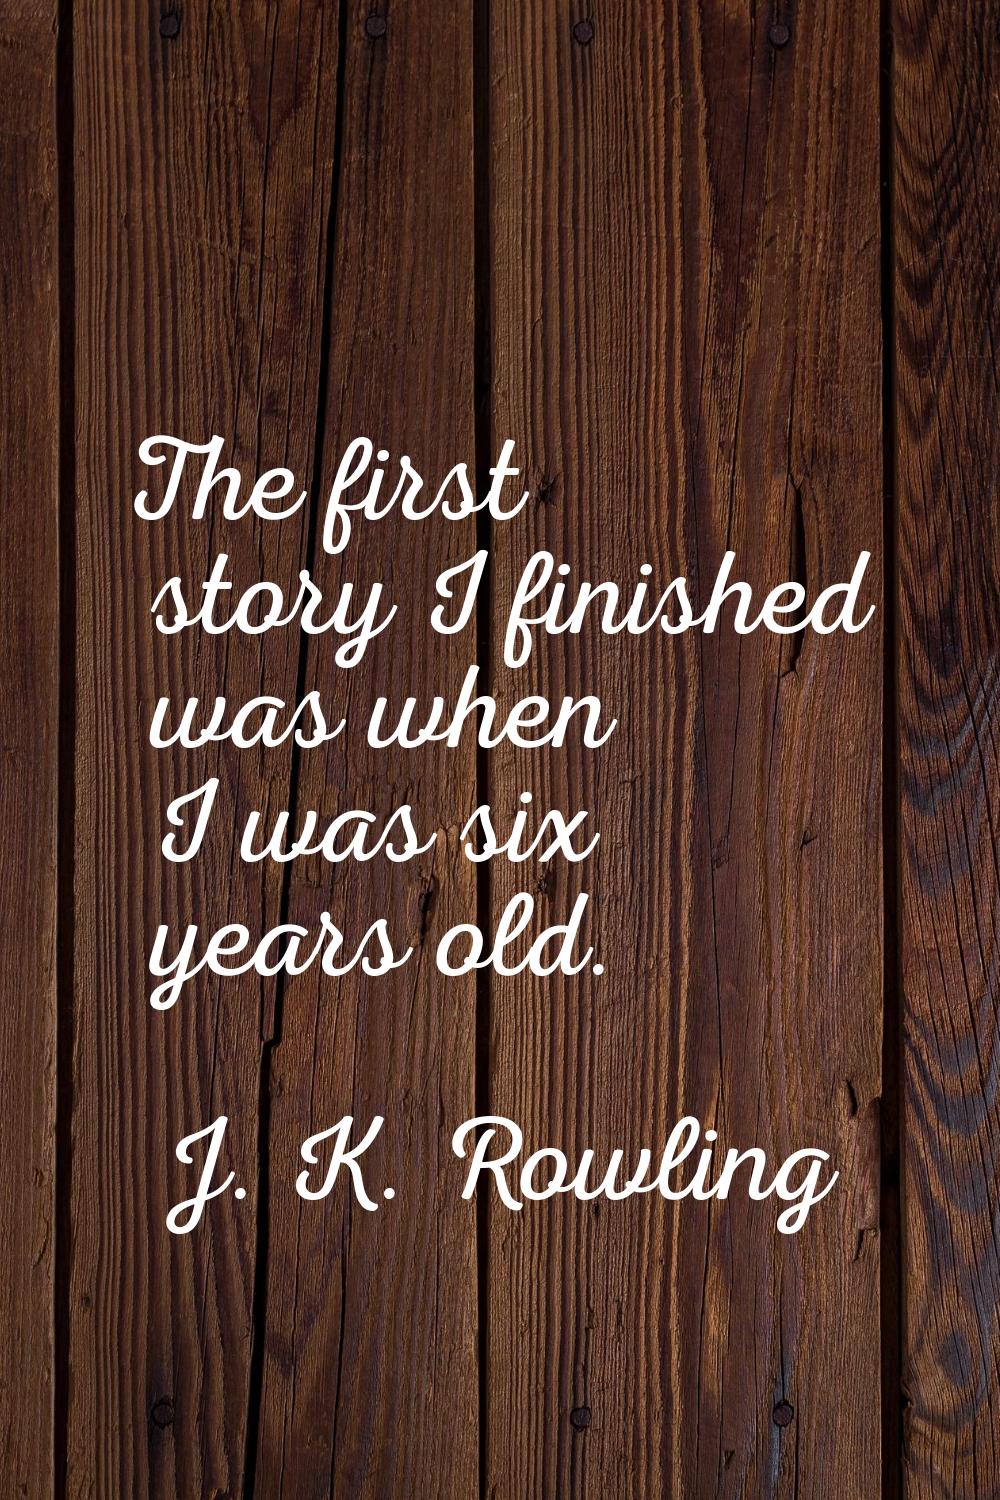 The first story I finished was when I was six years old.